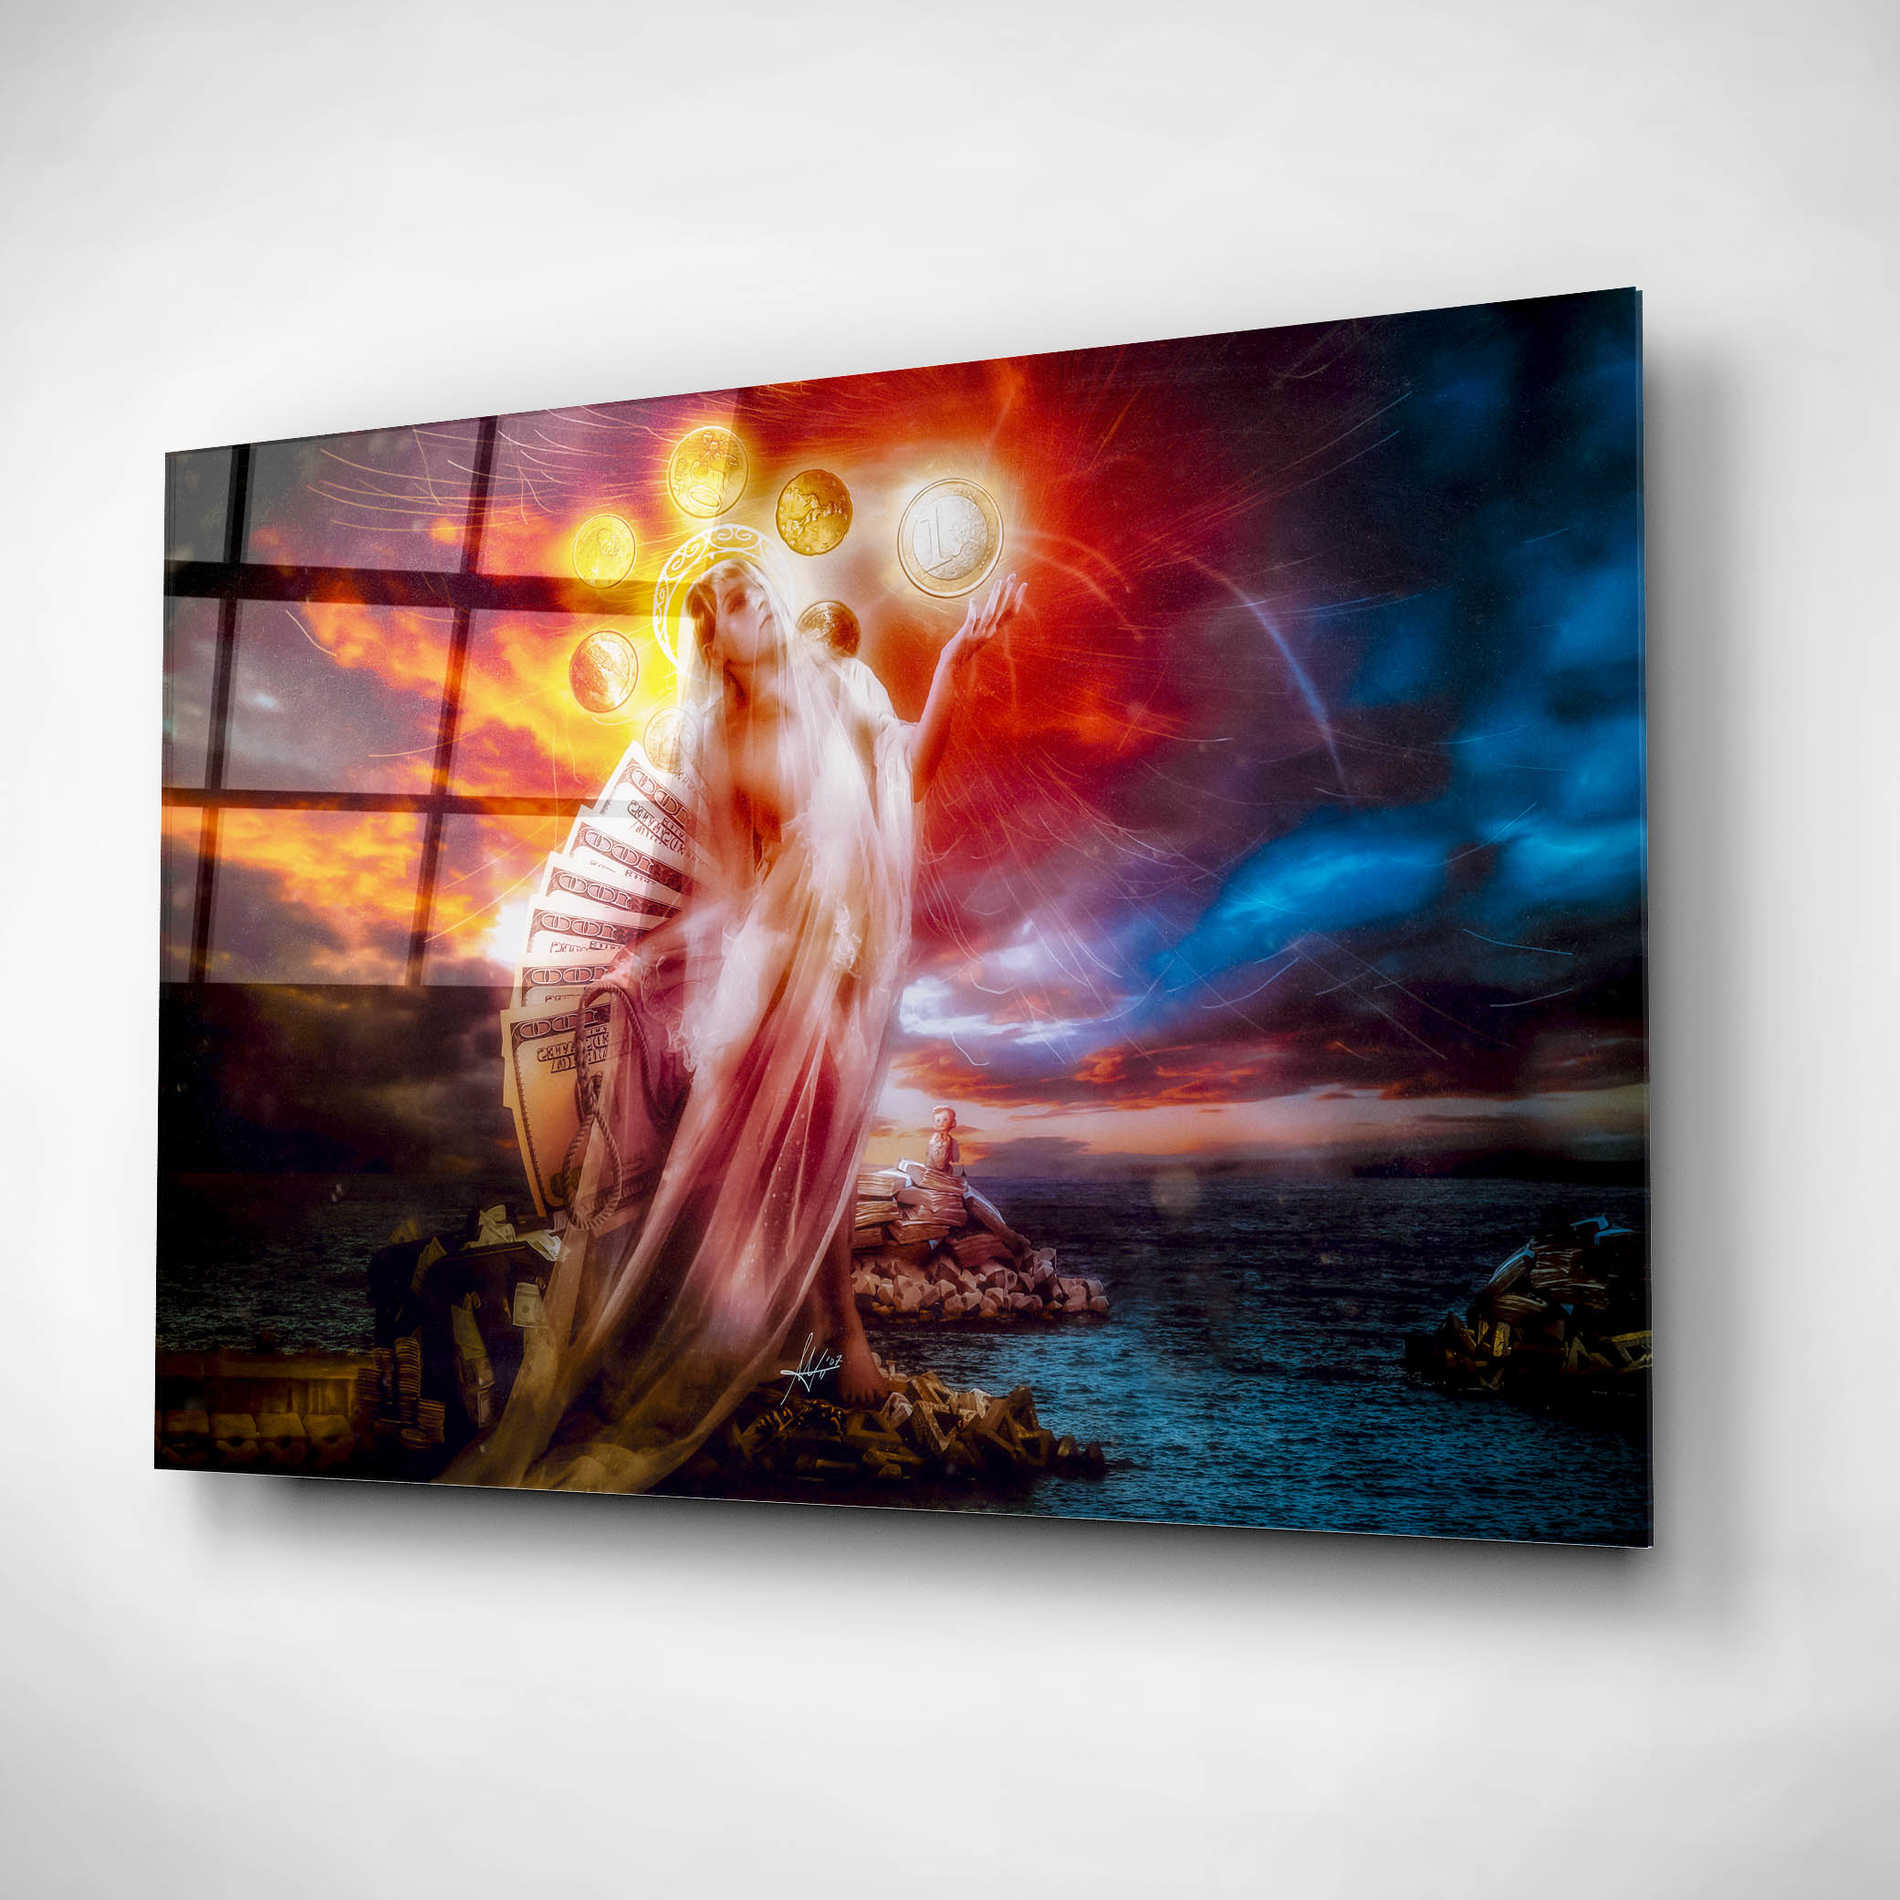 Epic Art 'St. Mary of Coins' by Mario Sanchez Nevado, Acrylic Glass Wall Art,12x16